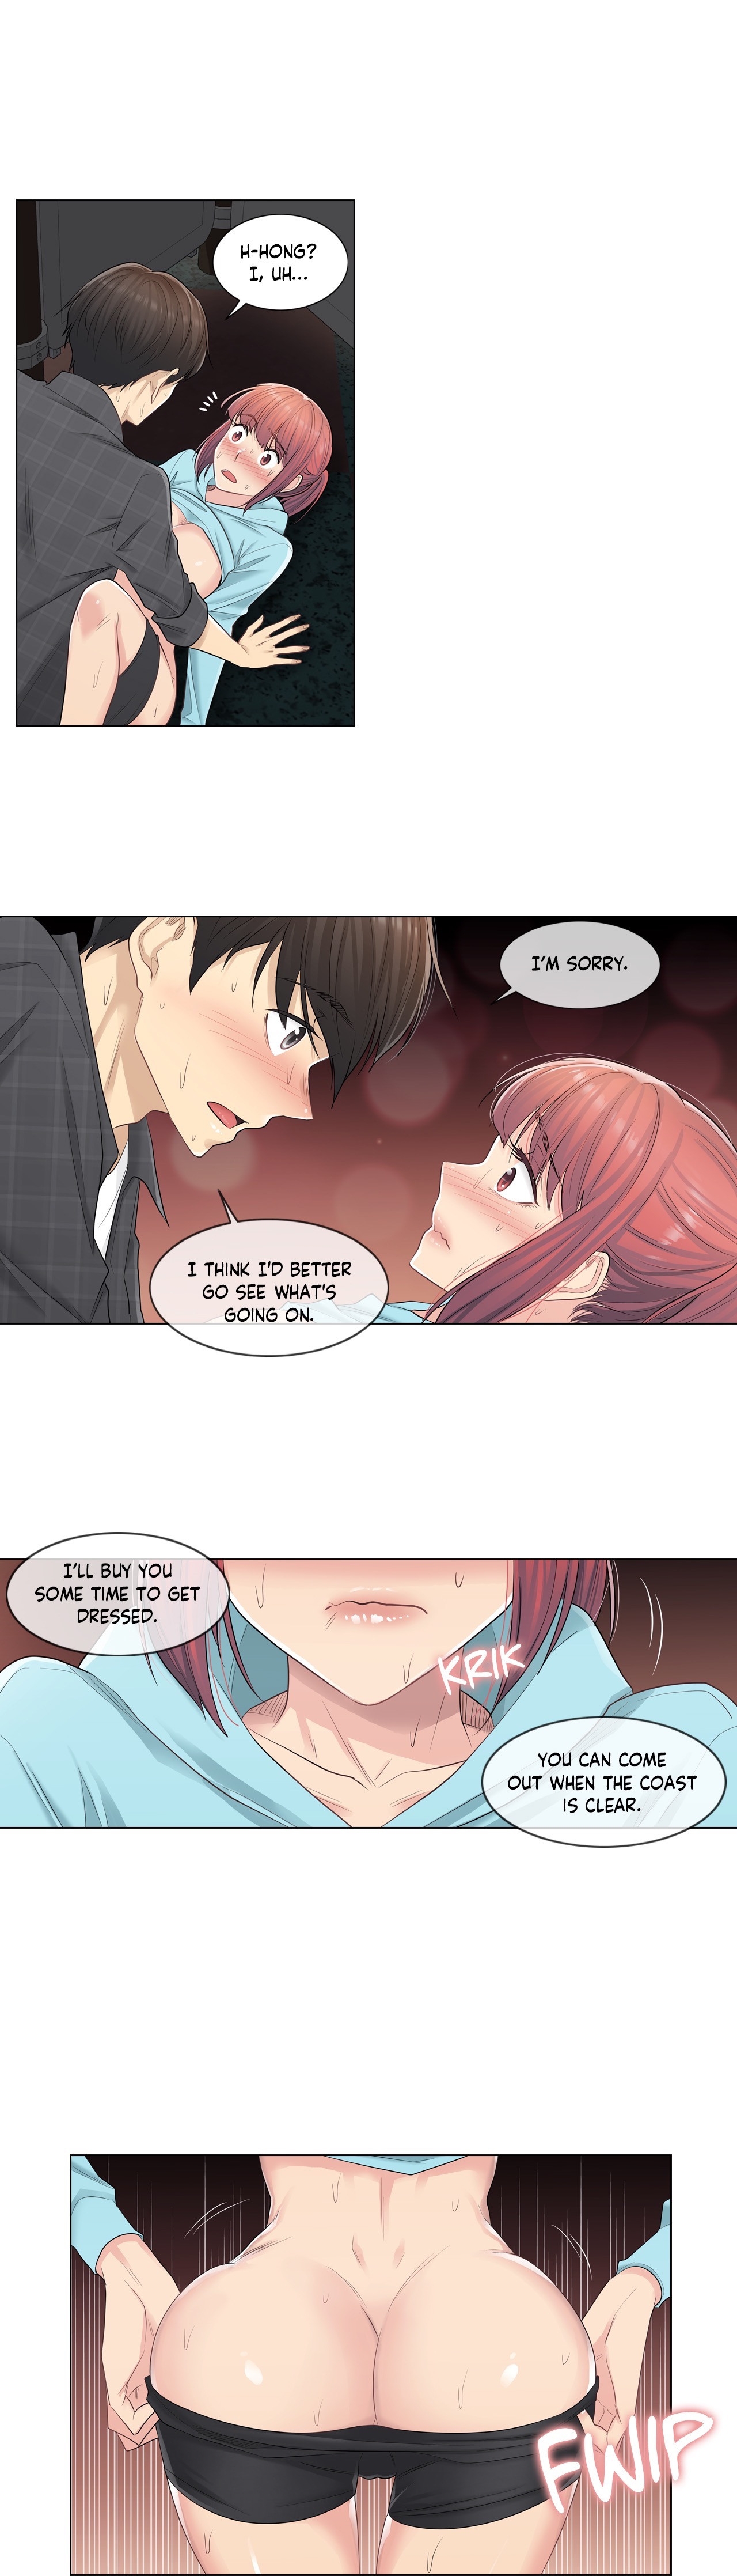 Touch to Unlock (CH04) (English) 1